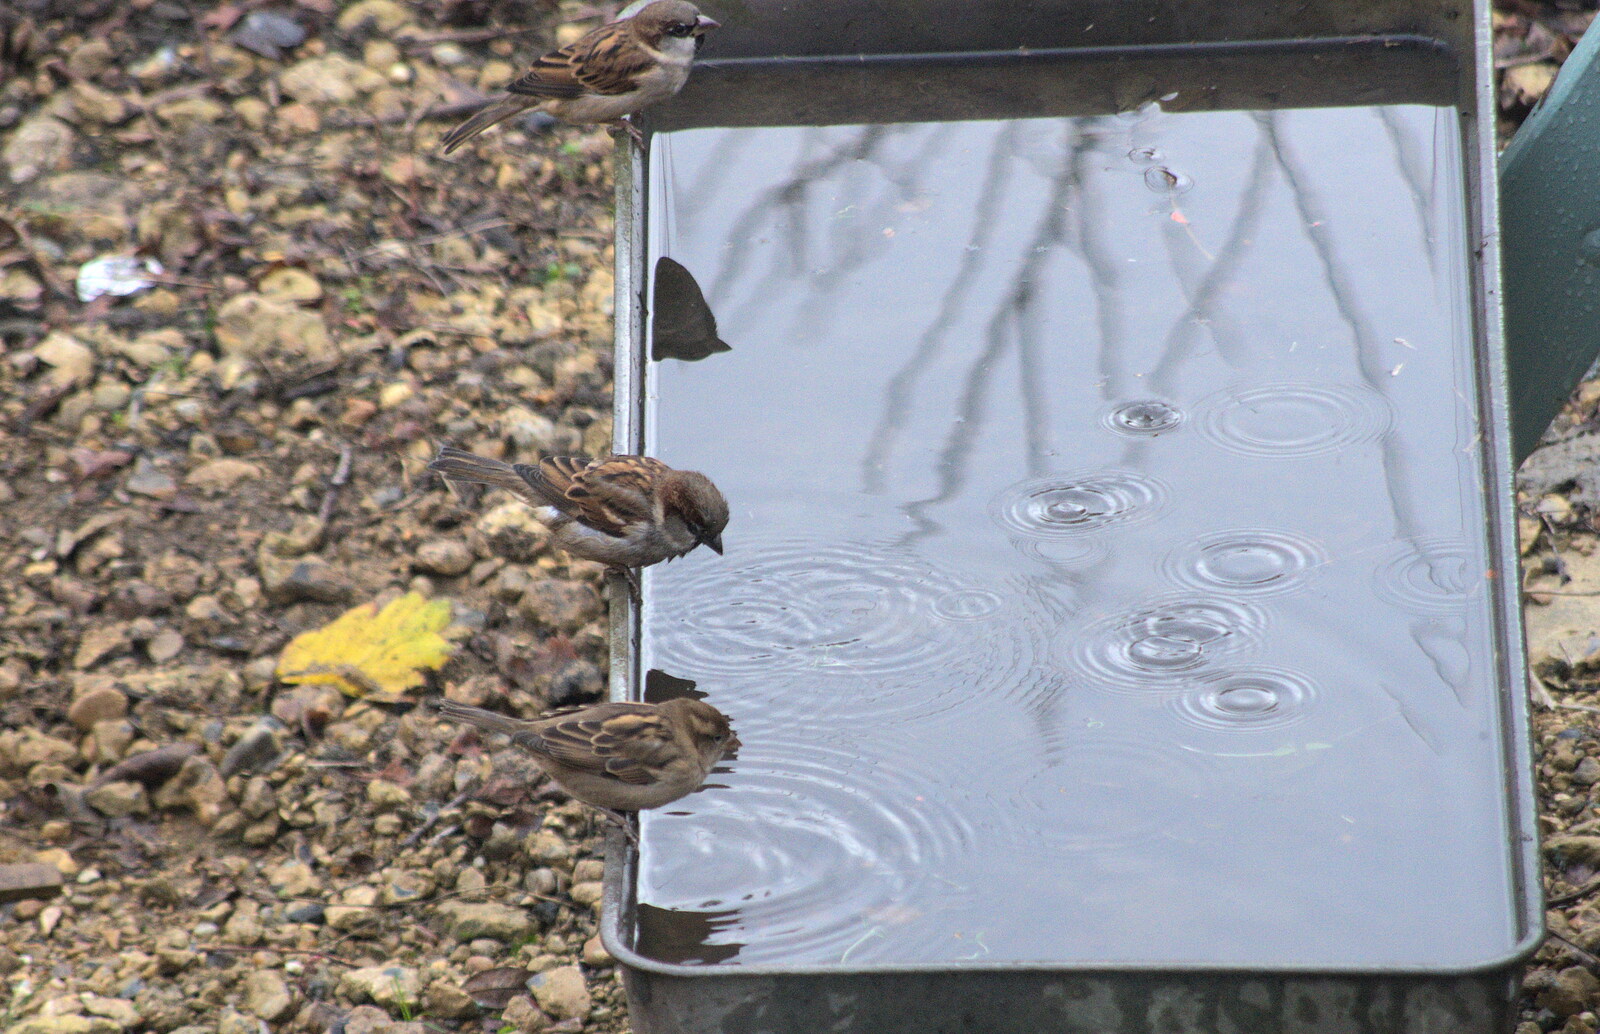 The sparrows are having fun in a tray of water from A Pub Crawl and Christmas Lights, Thornham, Cotton, Bacton and Eye, Suffolk - 7th December 2018